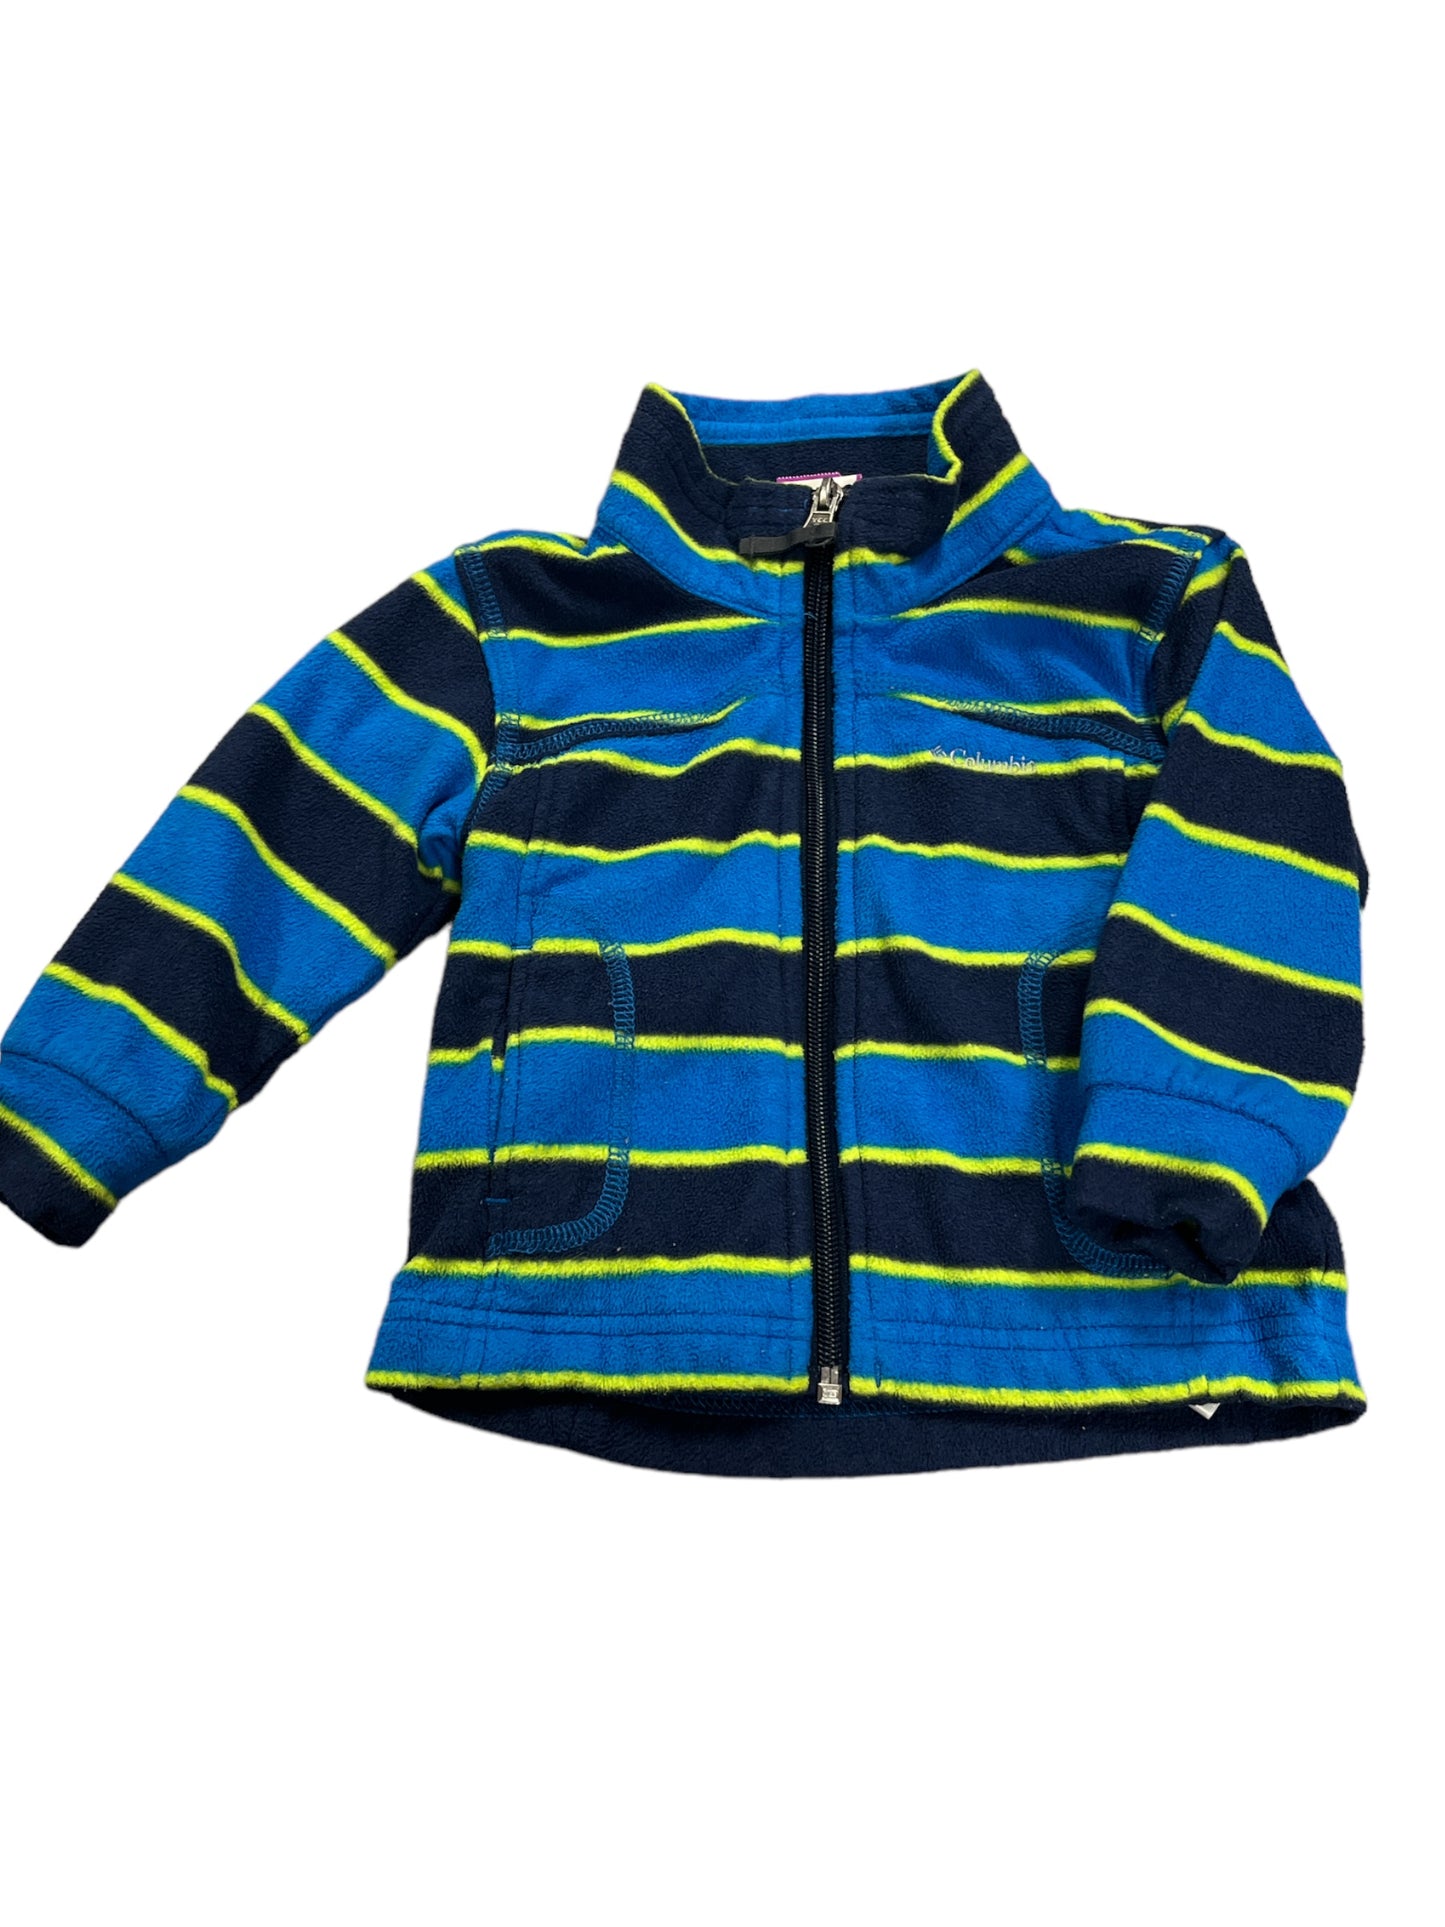 Yellow and blue sweater size 18m